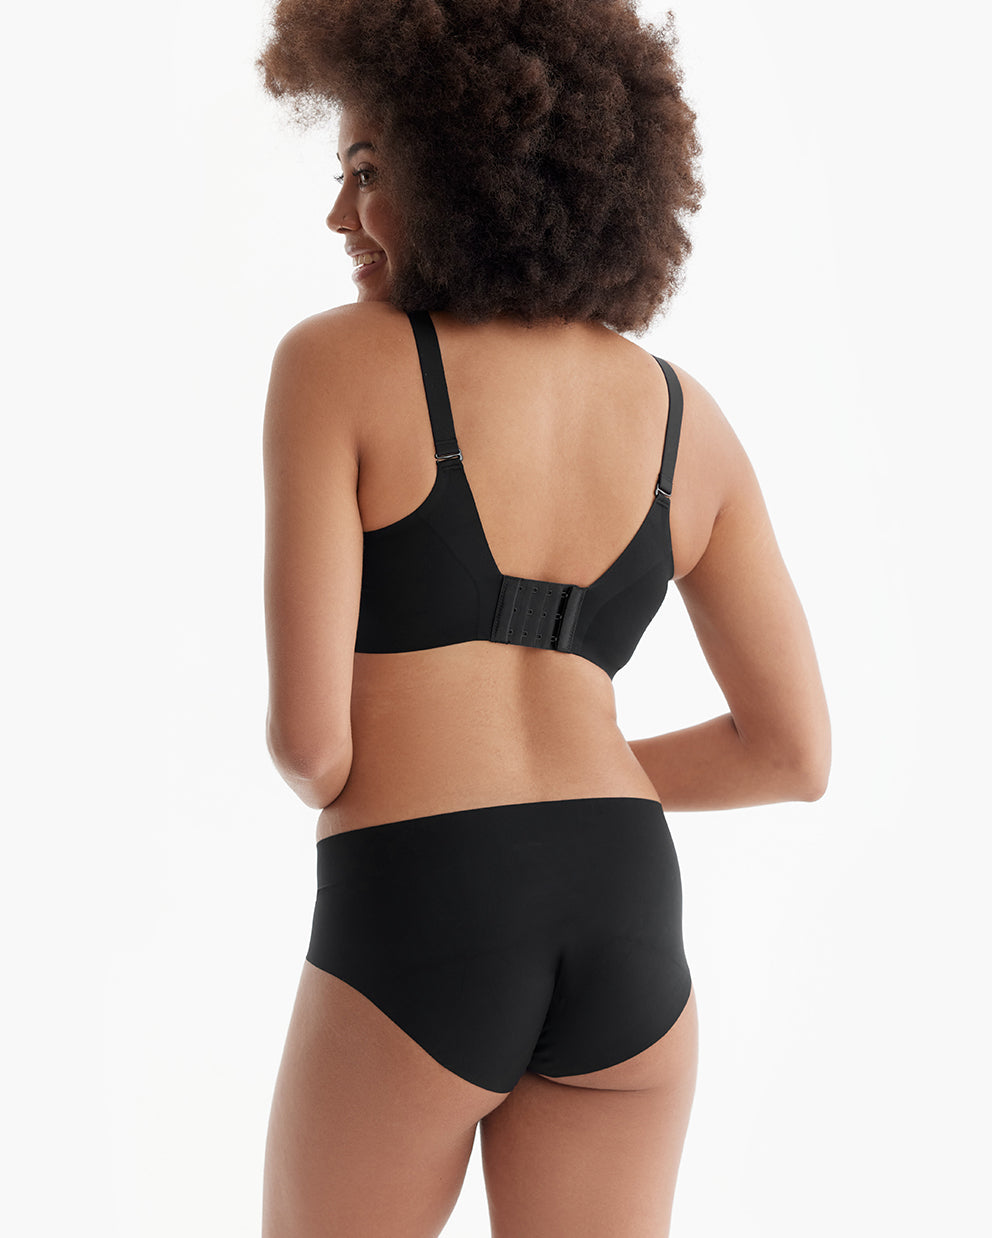 The Essentials: Our Jelly Strip + SMOOTH + DEX - 4-in-1 pumping Bra Bundle (3 Pack)